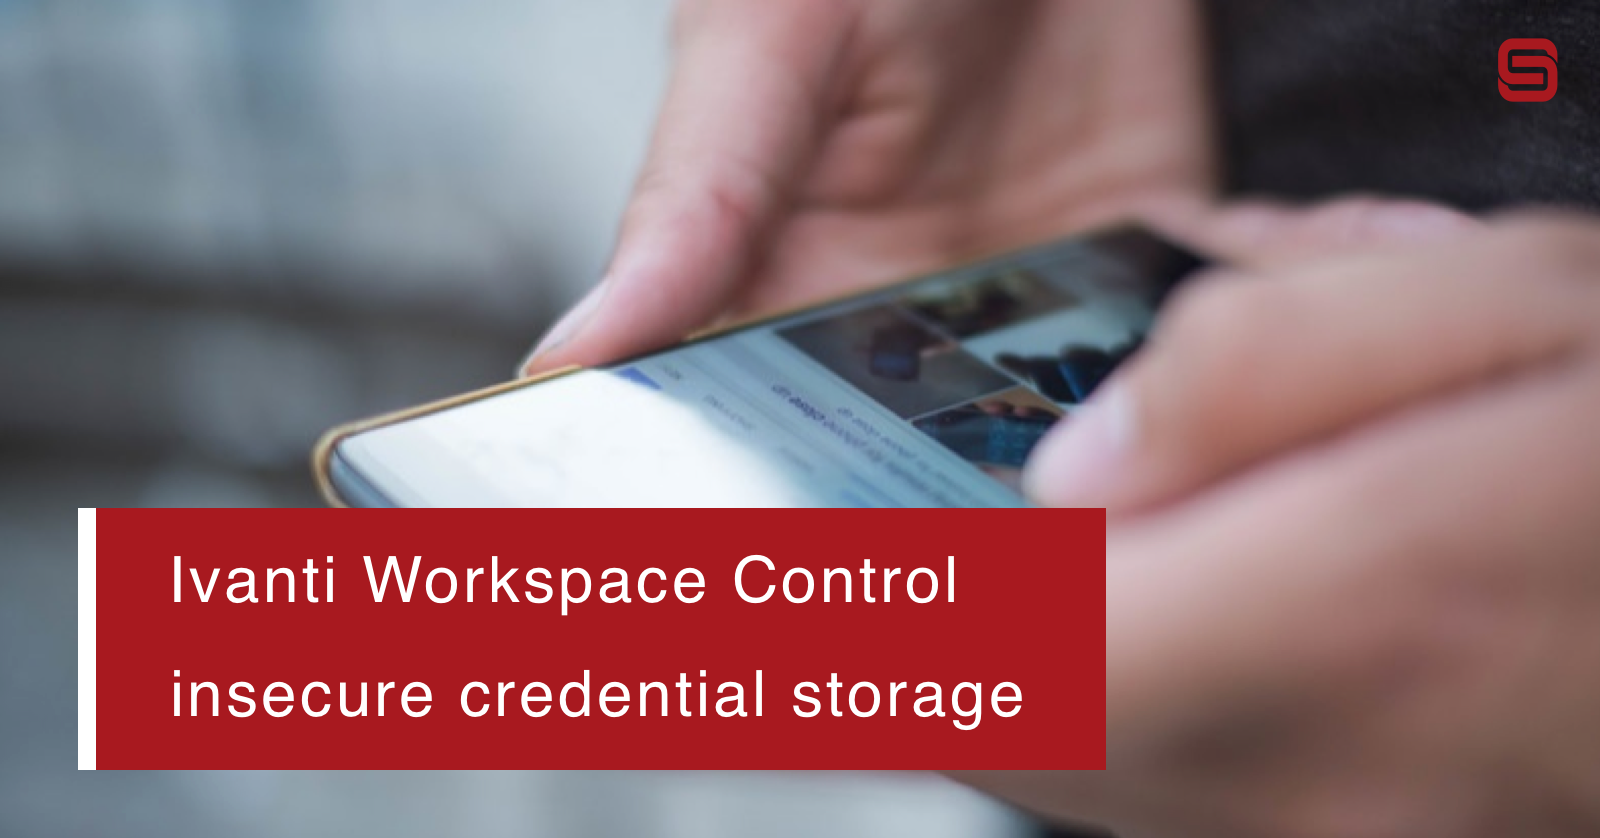 Stored credentials Ivanti Workspace Control can be retrieved from Registry